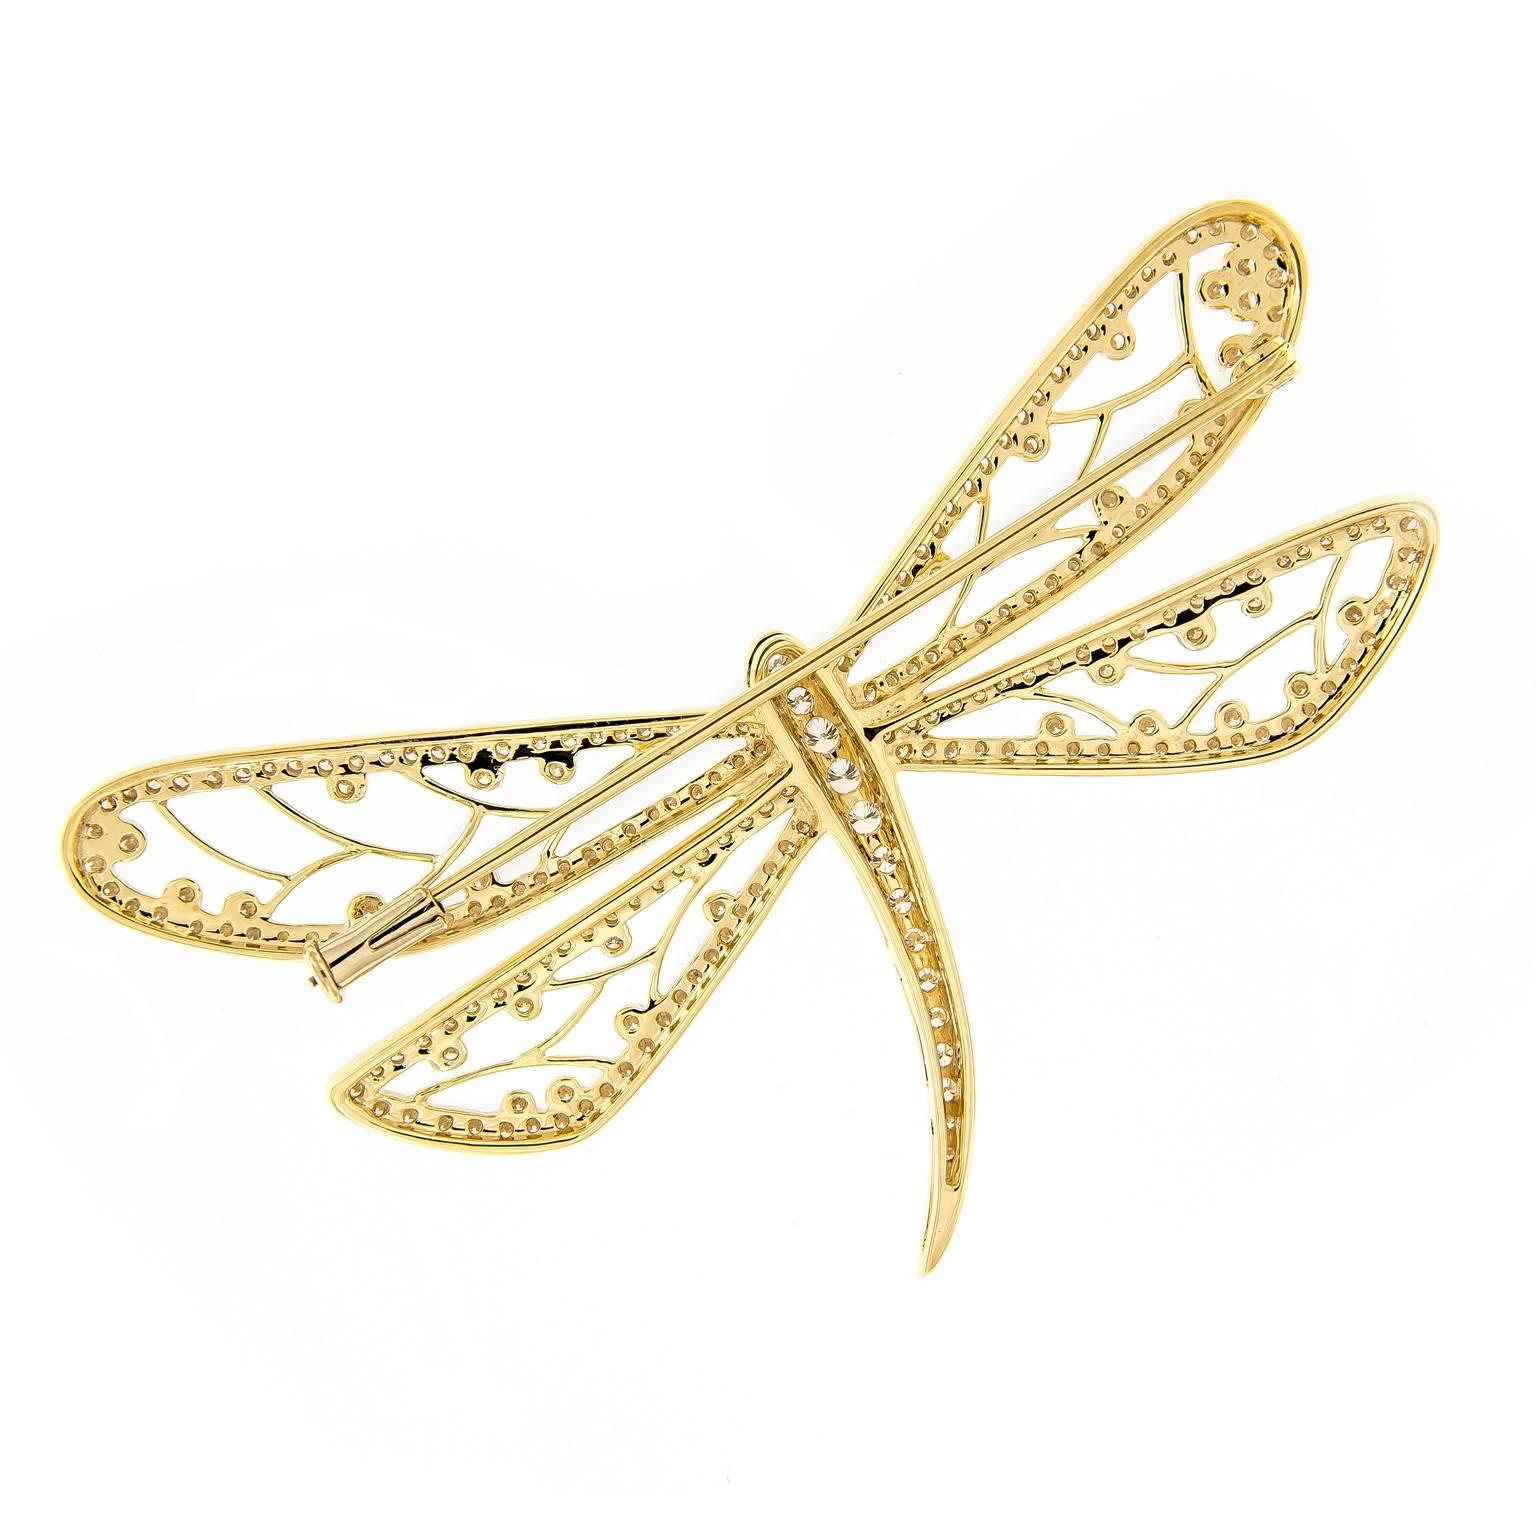 This beautiful dragonfly brooch is crafted in 18k yellow gold. Wings and body feature plenty of diamonds adding lots of sparkle and the open-work design of the wings are beaded polished gold.
2.5 in x 1.5 in (6.35 cm x 3.81 cm)

Diamonds 1.48 cttw